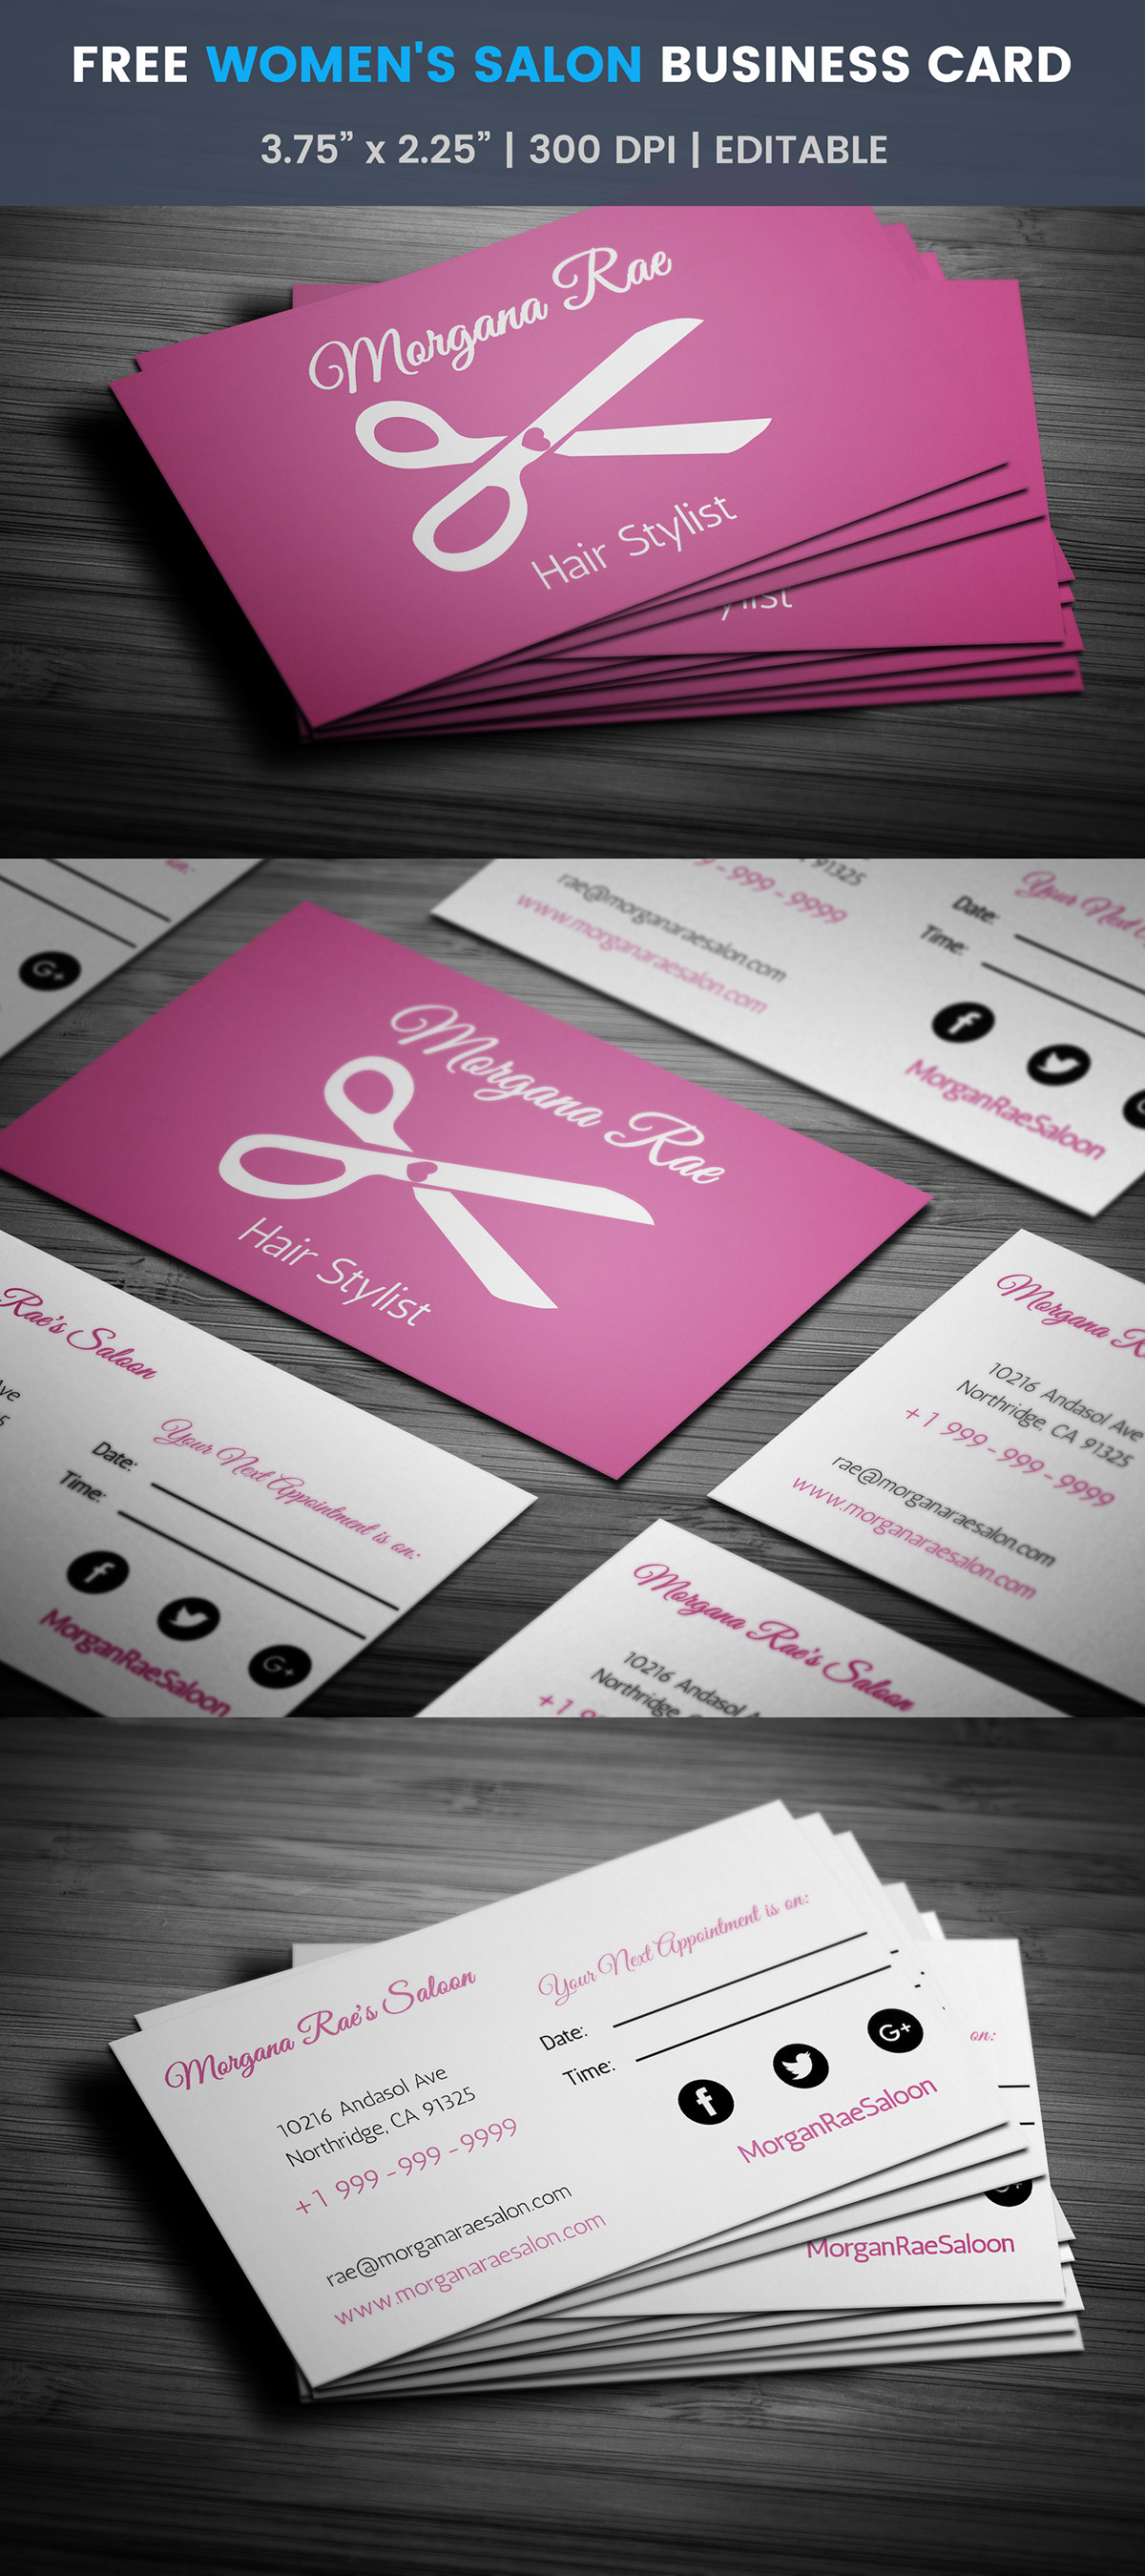 Hairdressing Business Cards Line Hairstylist Salon Designs Of Hairdresser Business Card Templates Free